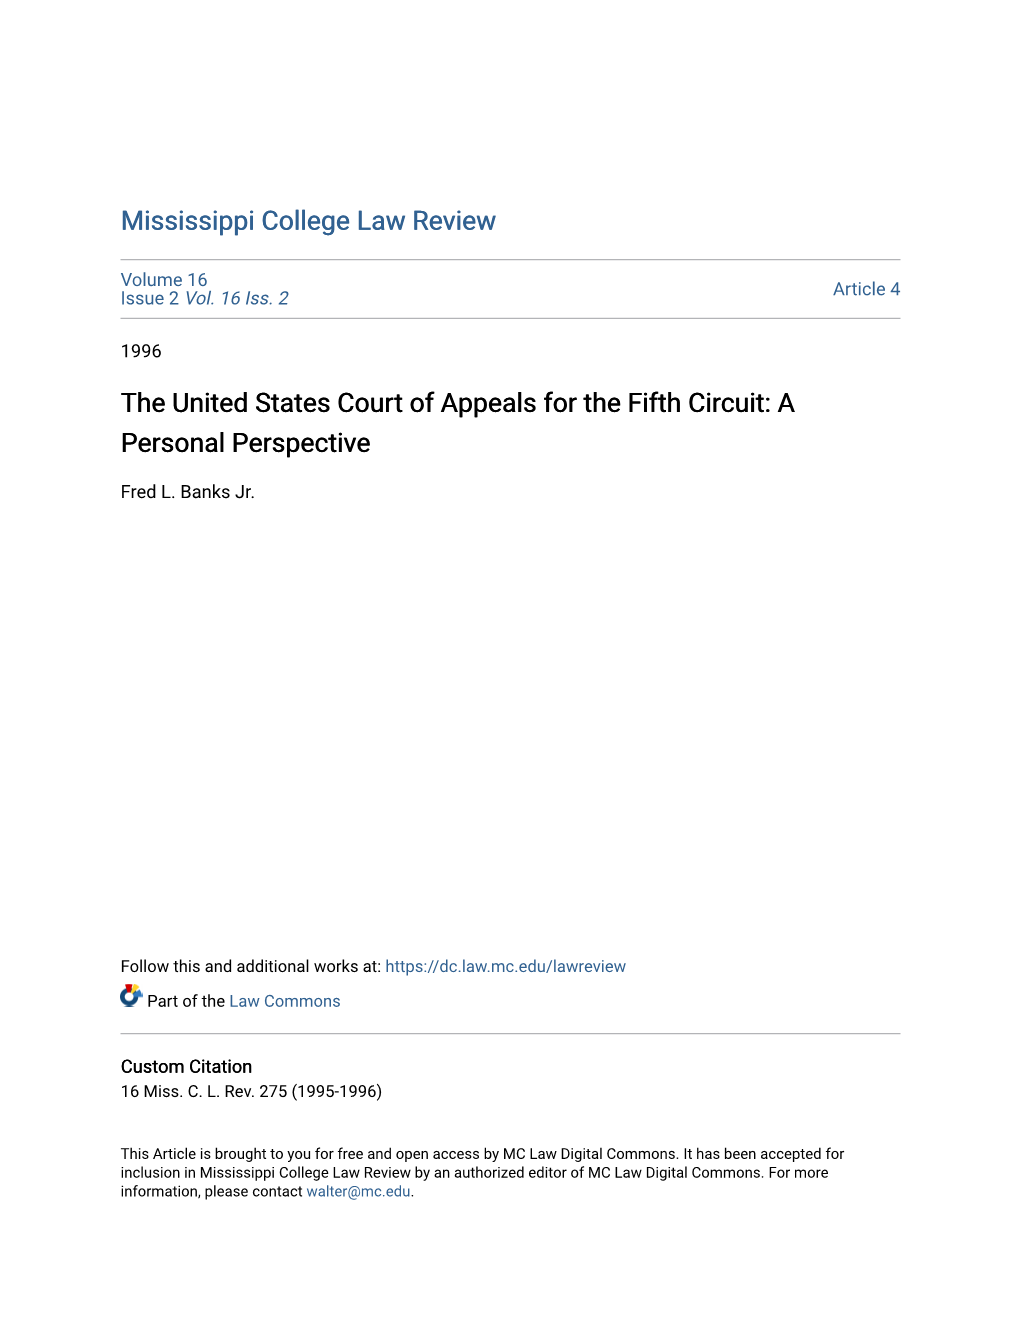 The United States Court of Appeals for the Fifth Circuit: a Personal Perspective